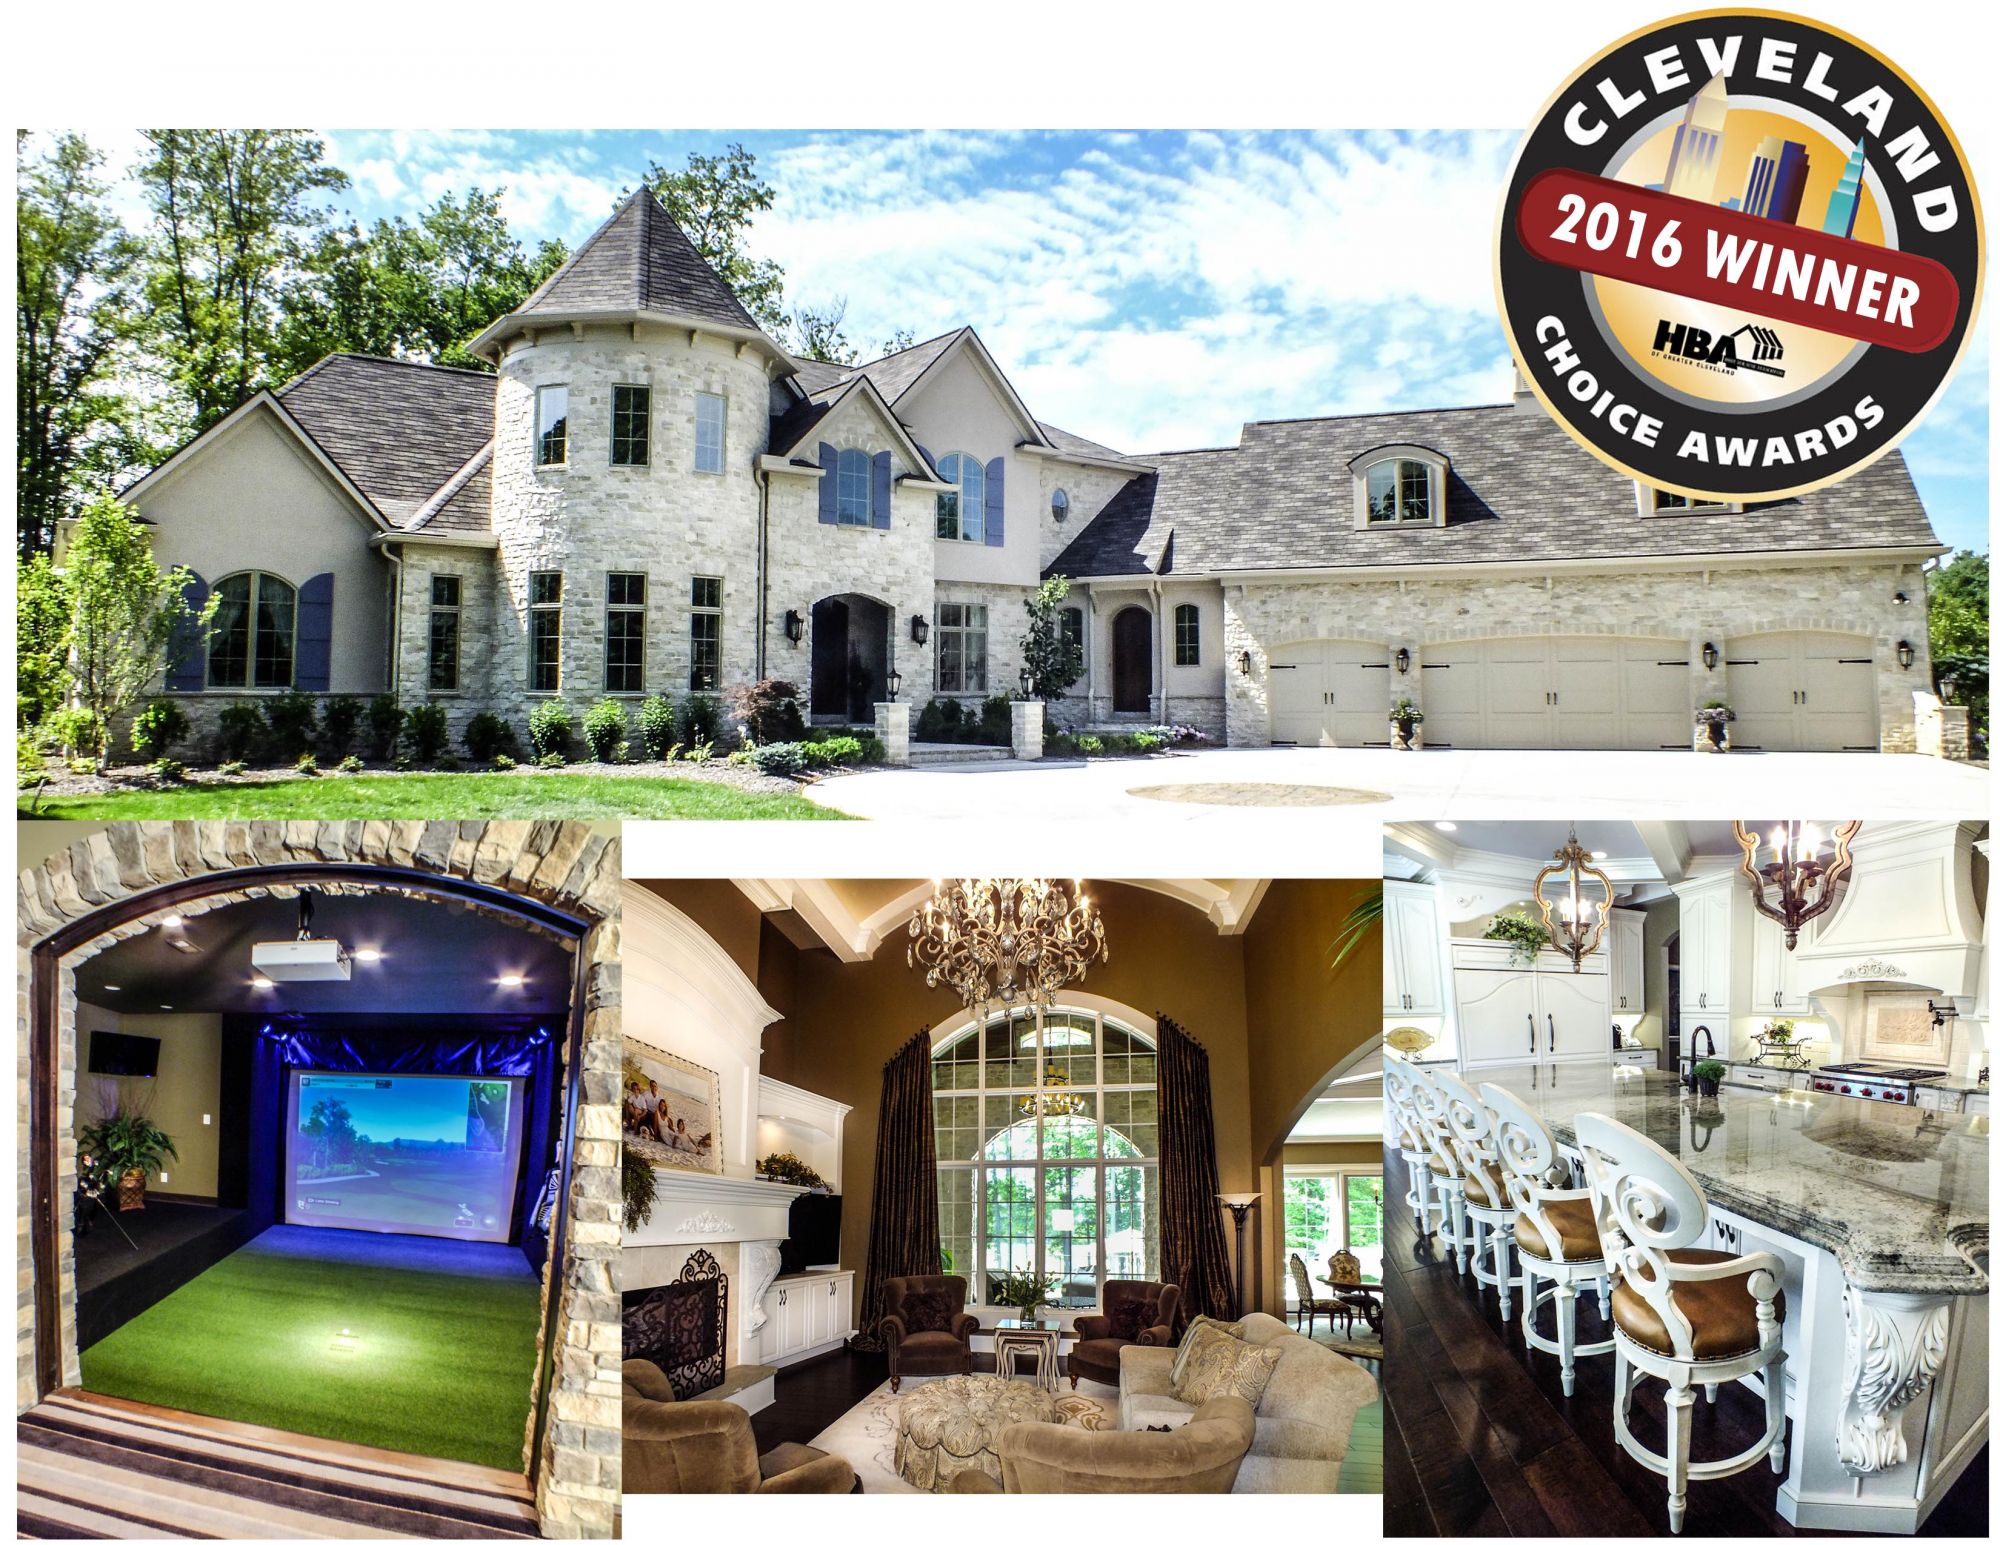 Best Custom Home of the Year - Over $1 Million